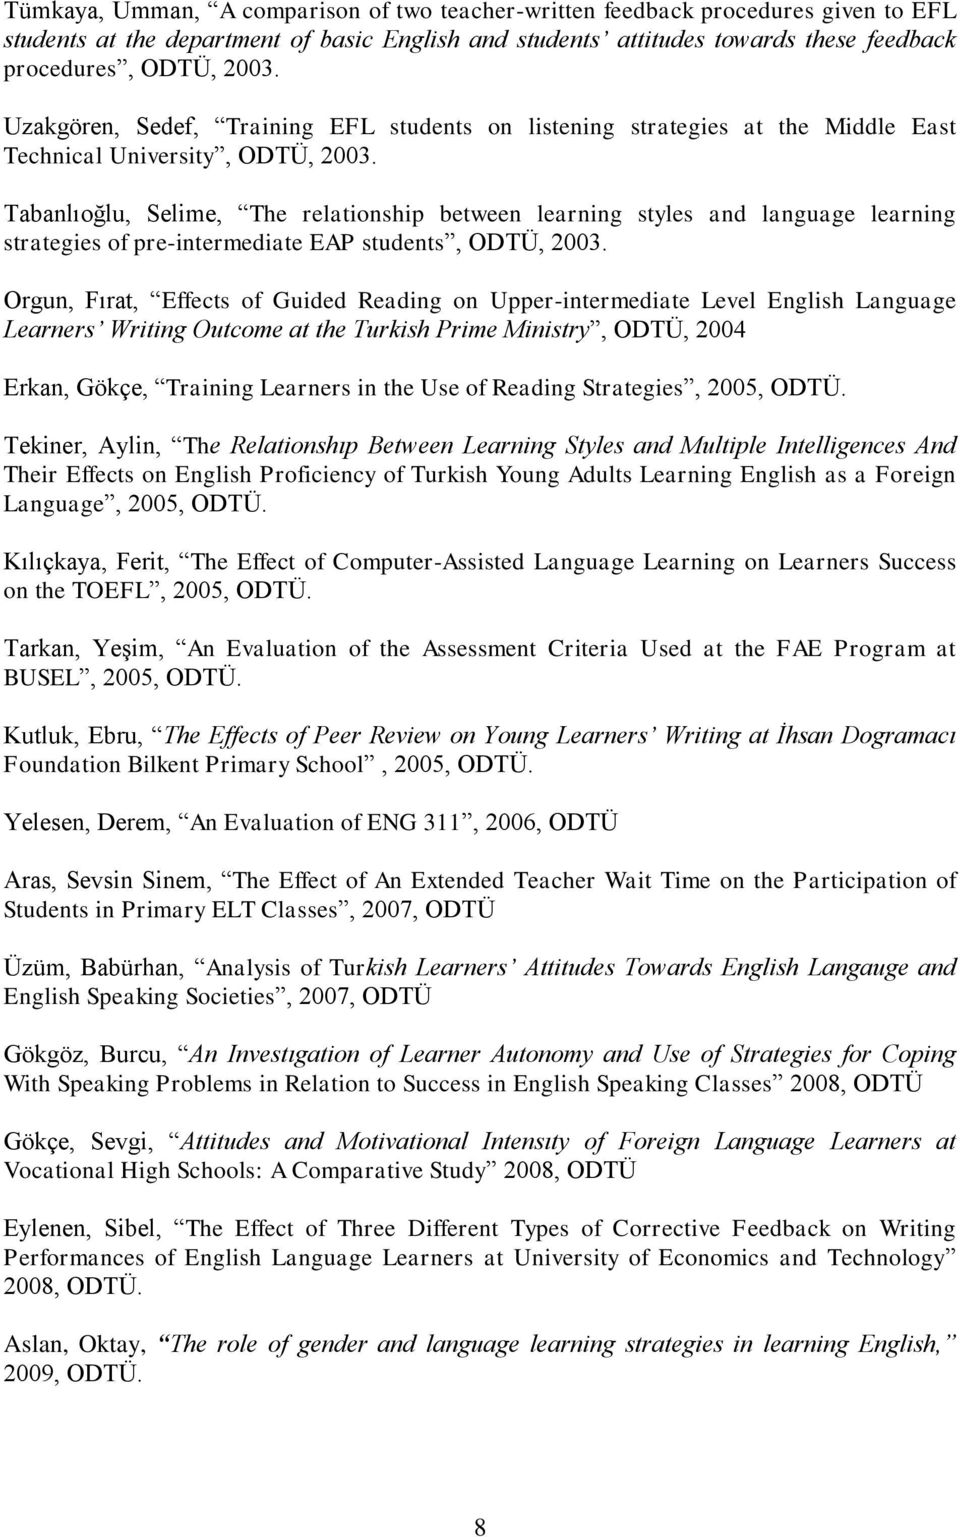 Tabanlıoğlu, Selime, The relationship between learning styles and language learning strategies of pre-intermediate EAP students, ODTÜ, 2003.